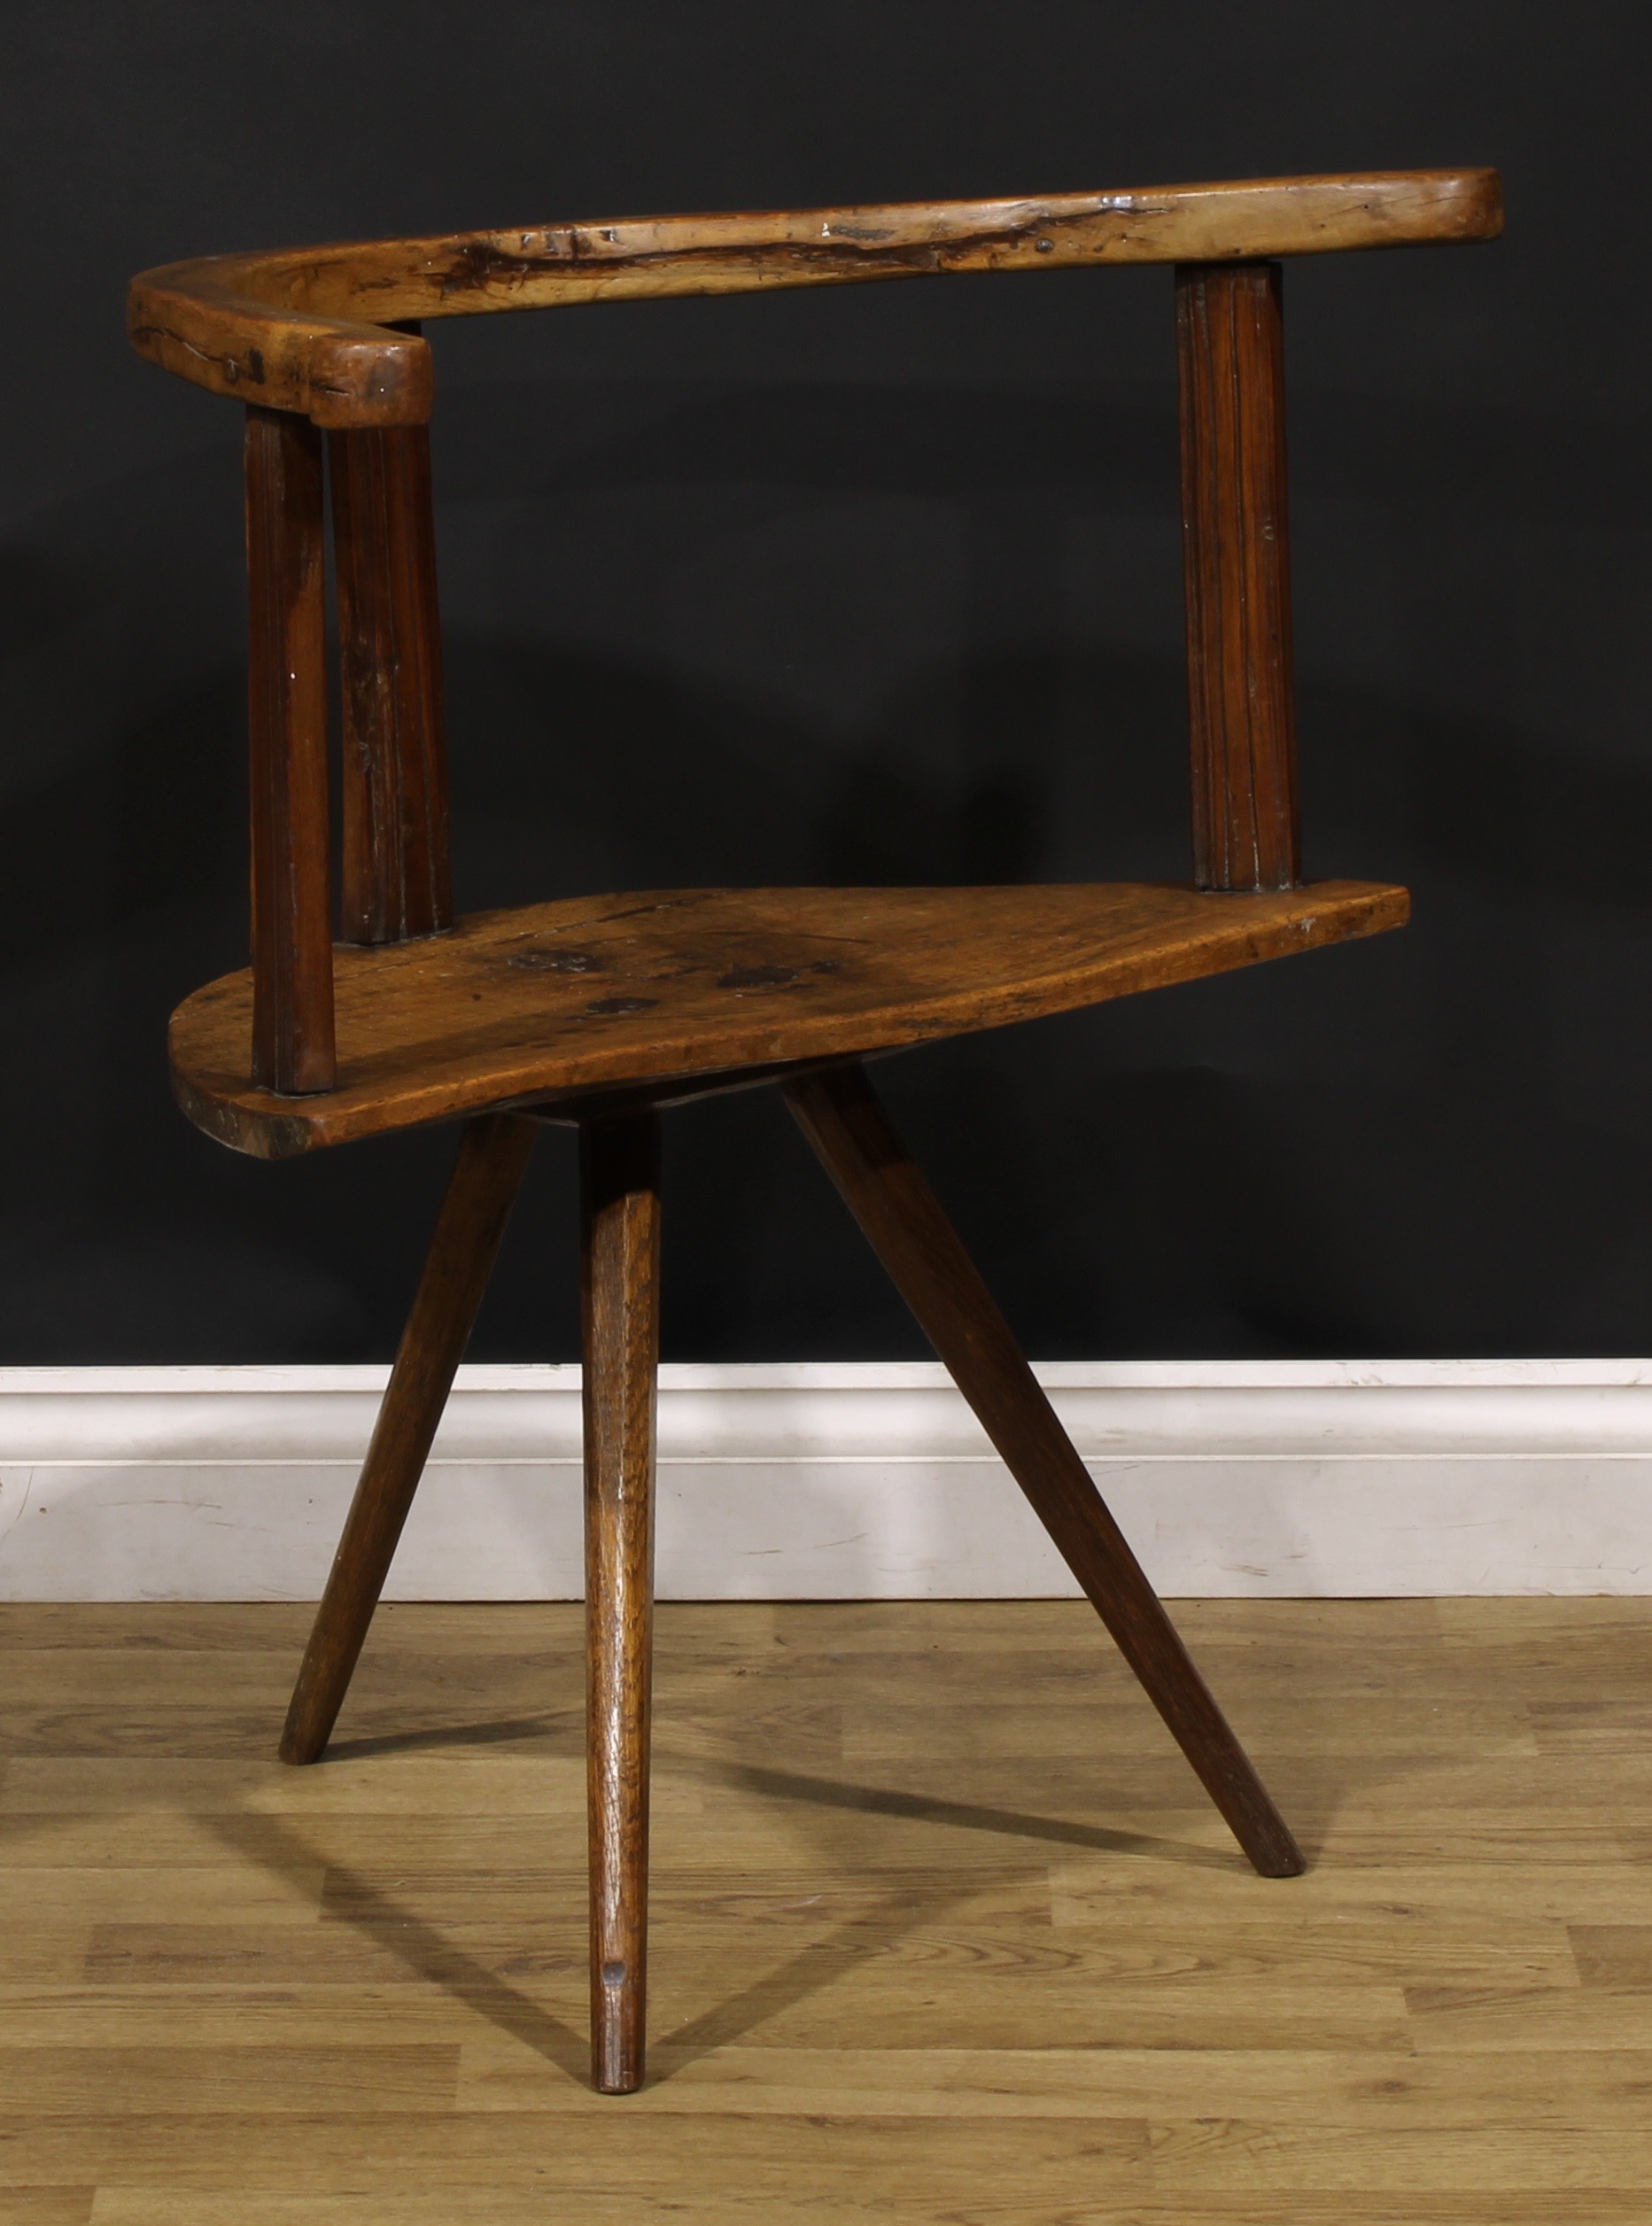 A 19th century primitive and vernacular indigenous timber cricket-form hedge or famine chair, - Bild 2 aus 4